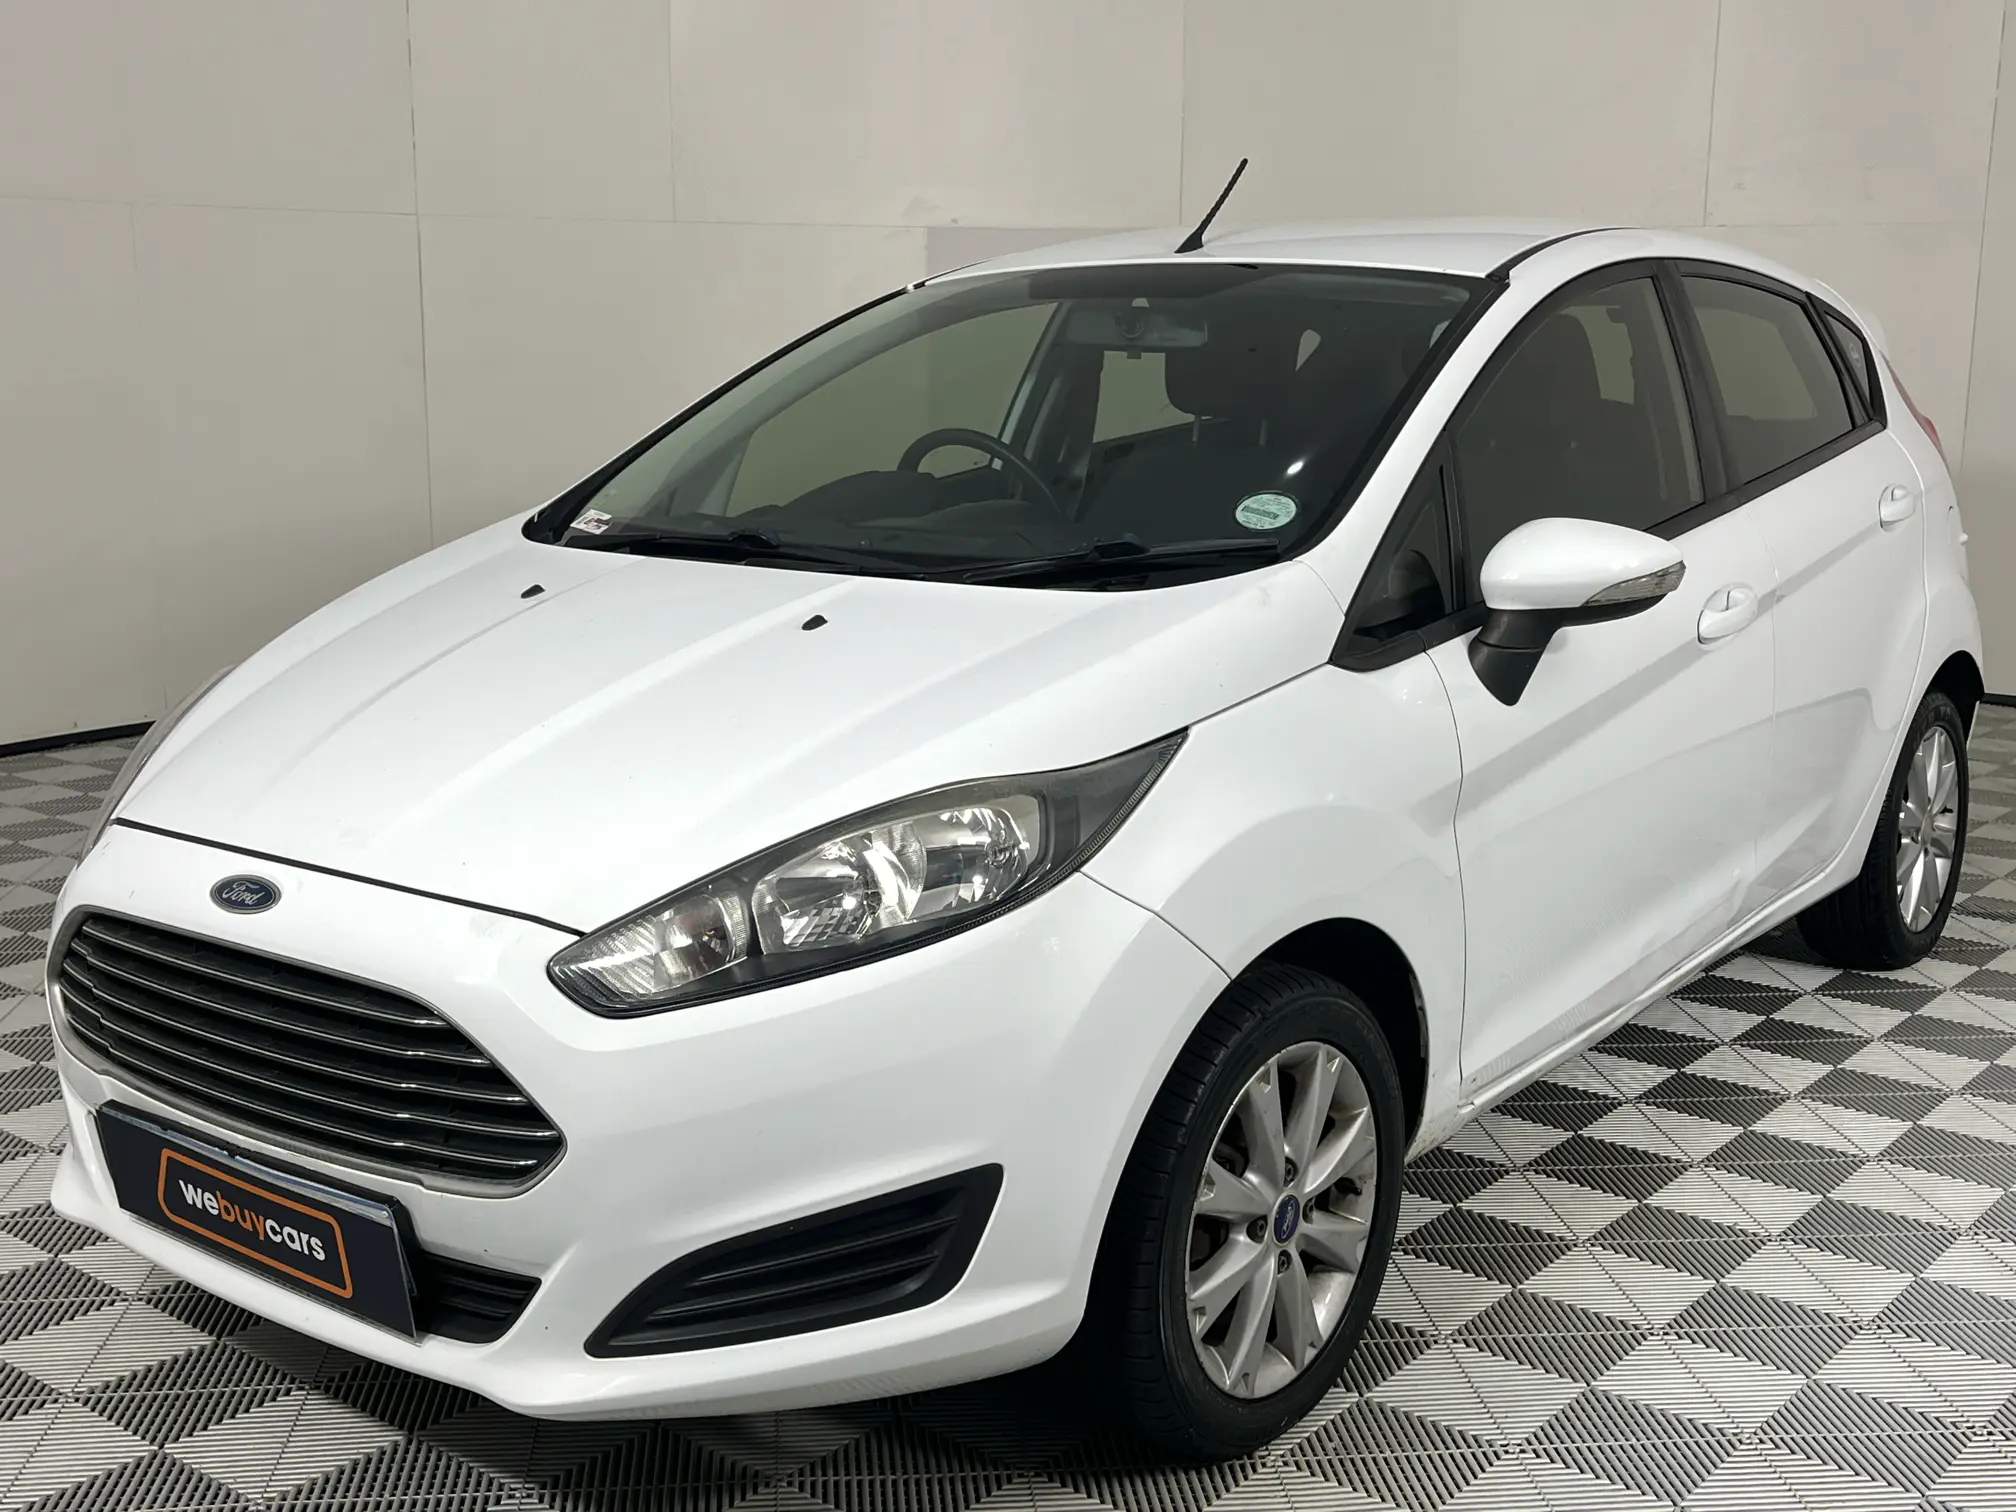 2013 Ford Fiesta 1.4 Ambiente 5 DR